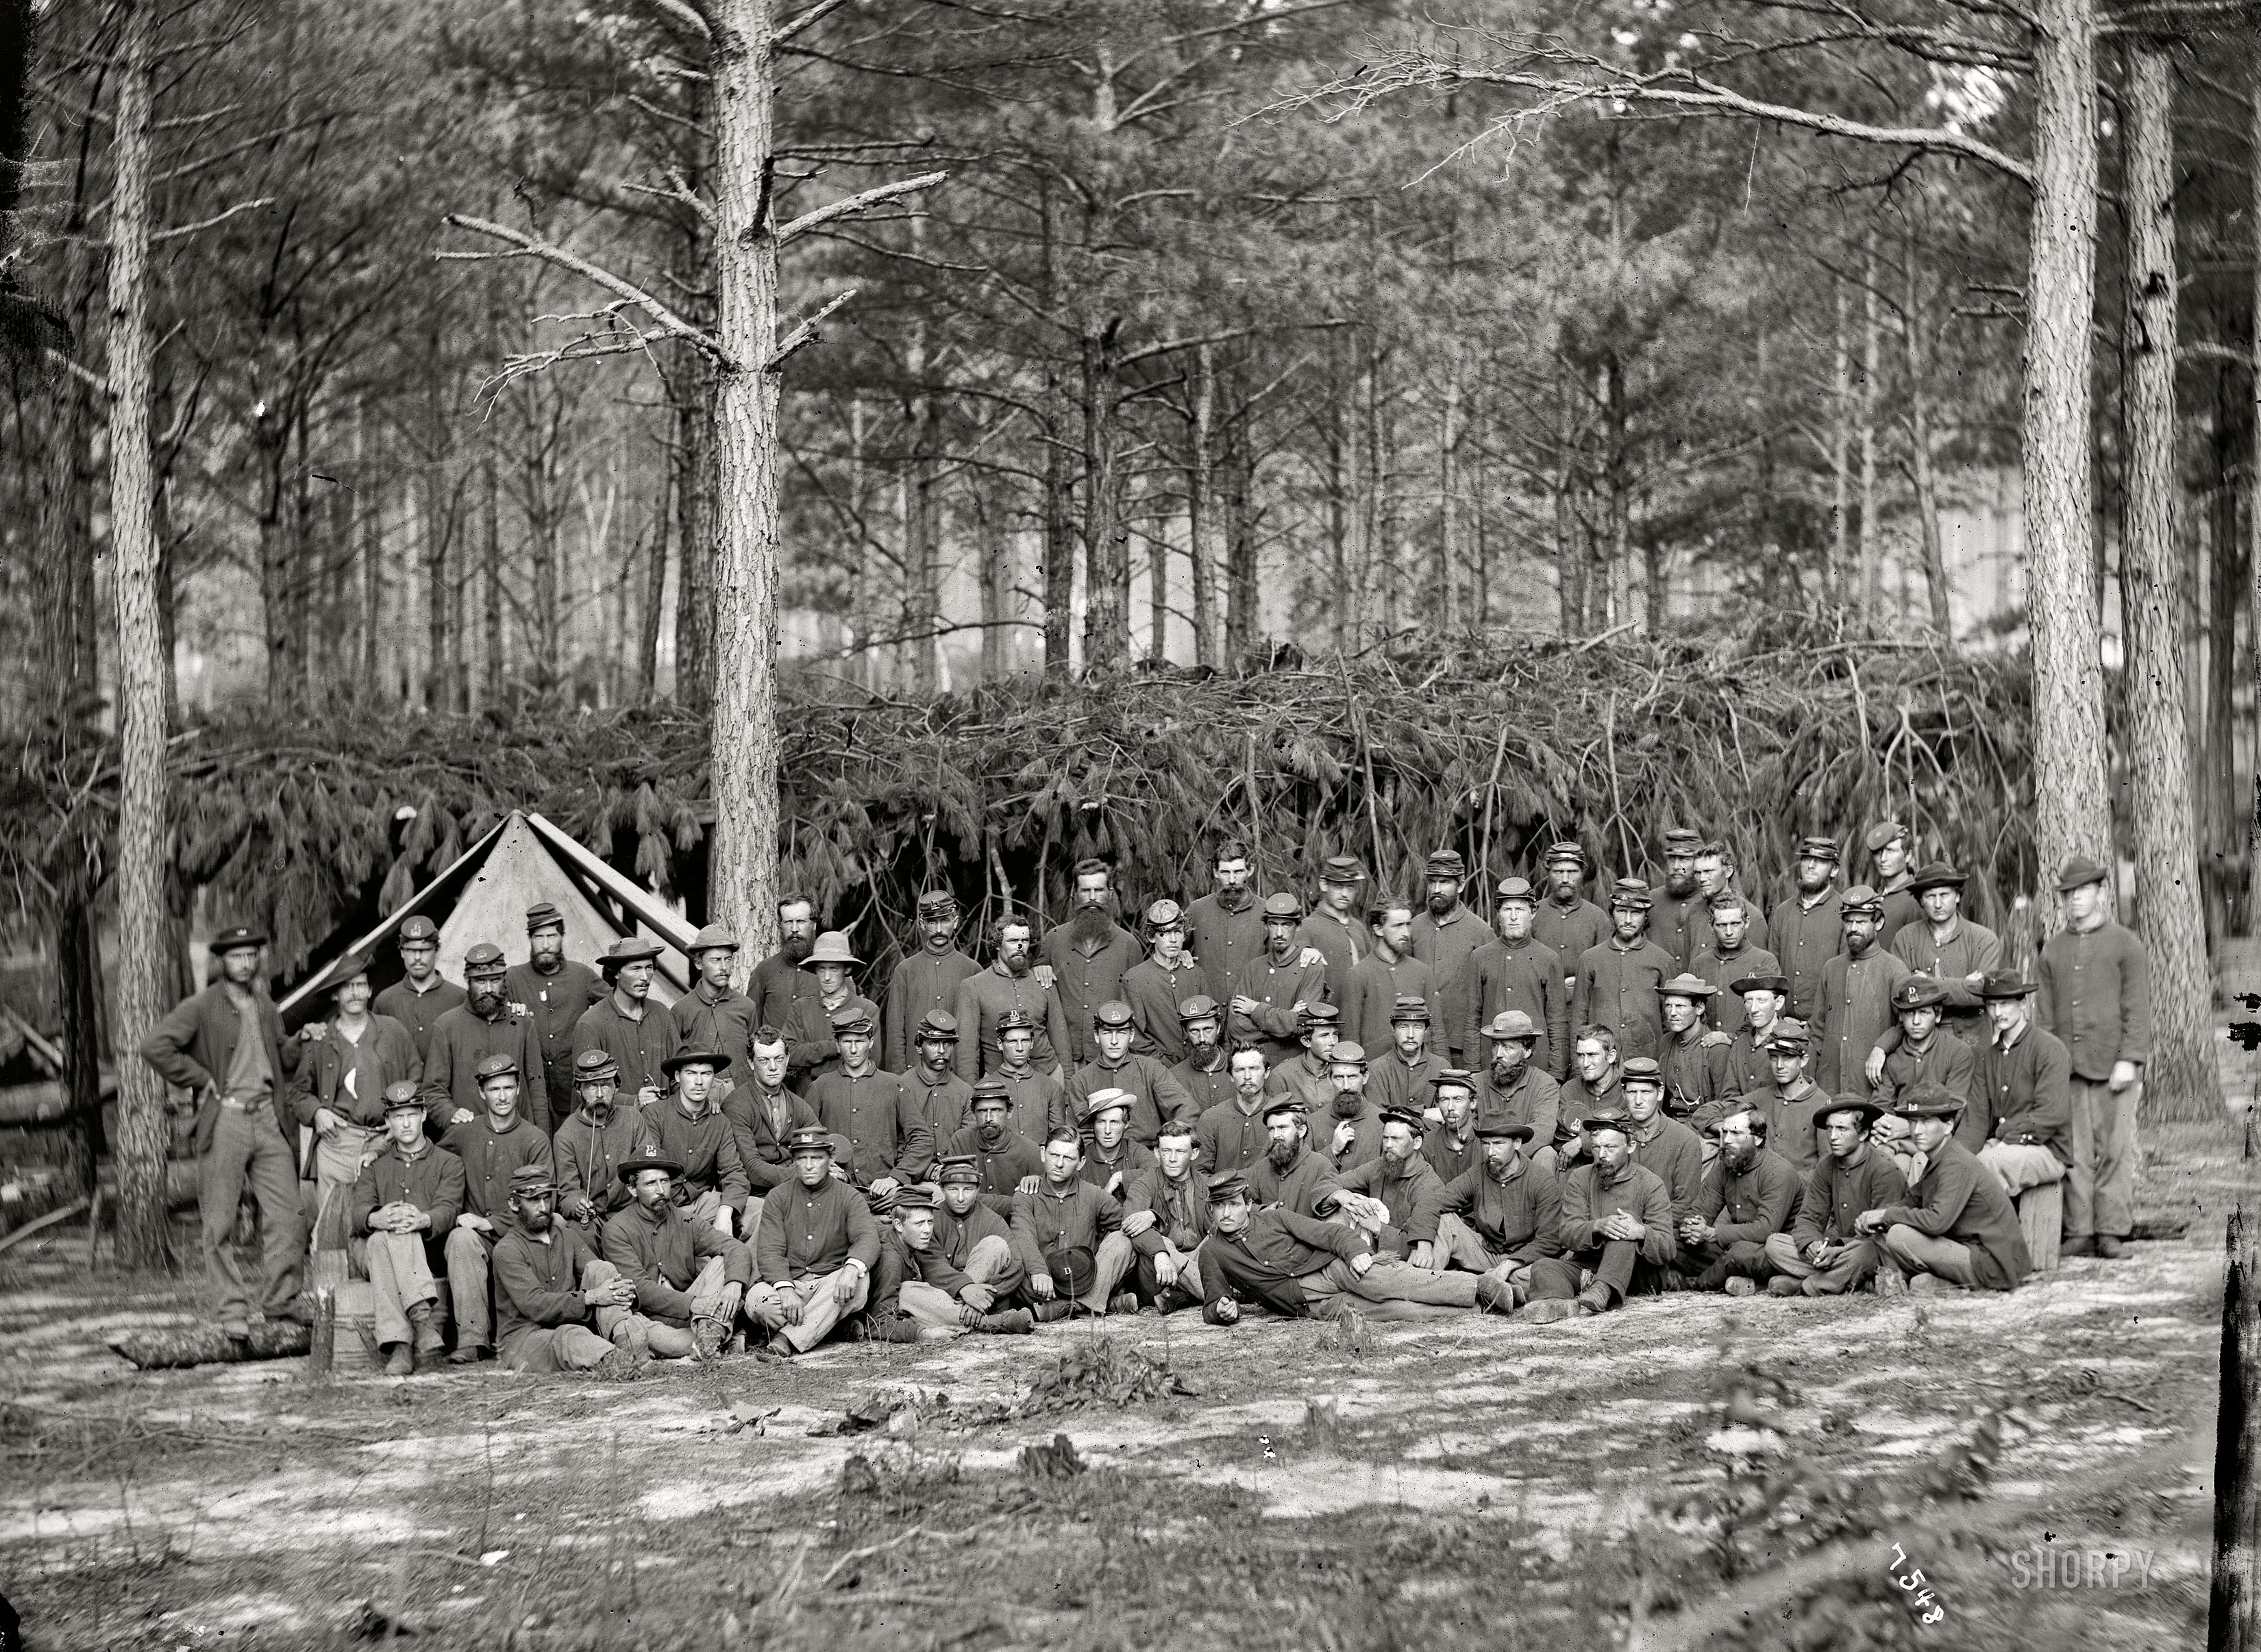 August 1864. "Group of men of Company D, U.S. Engineer Battalion, in front of Petersburg." Wet plate glass negative, photographer unknown. View full size.